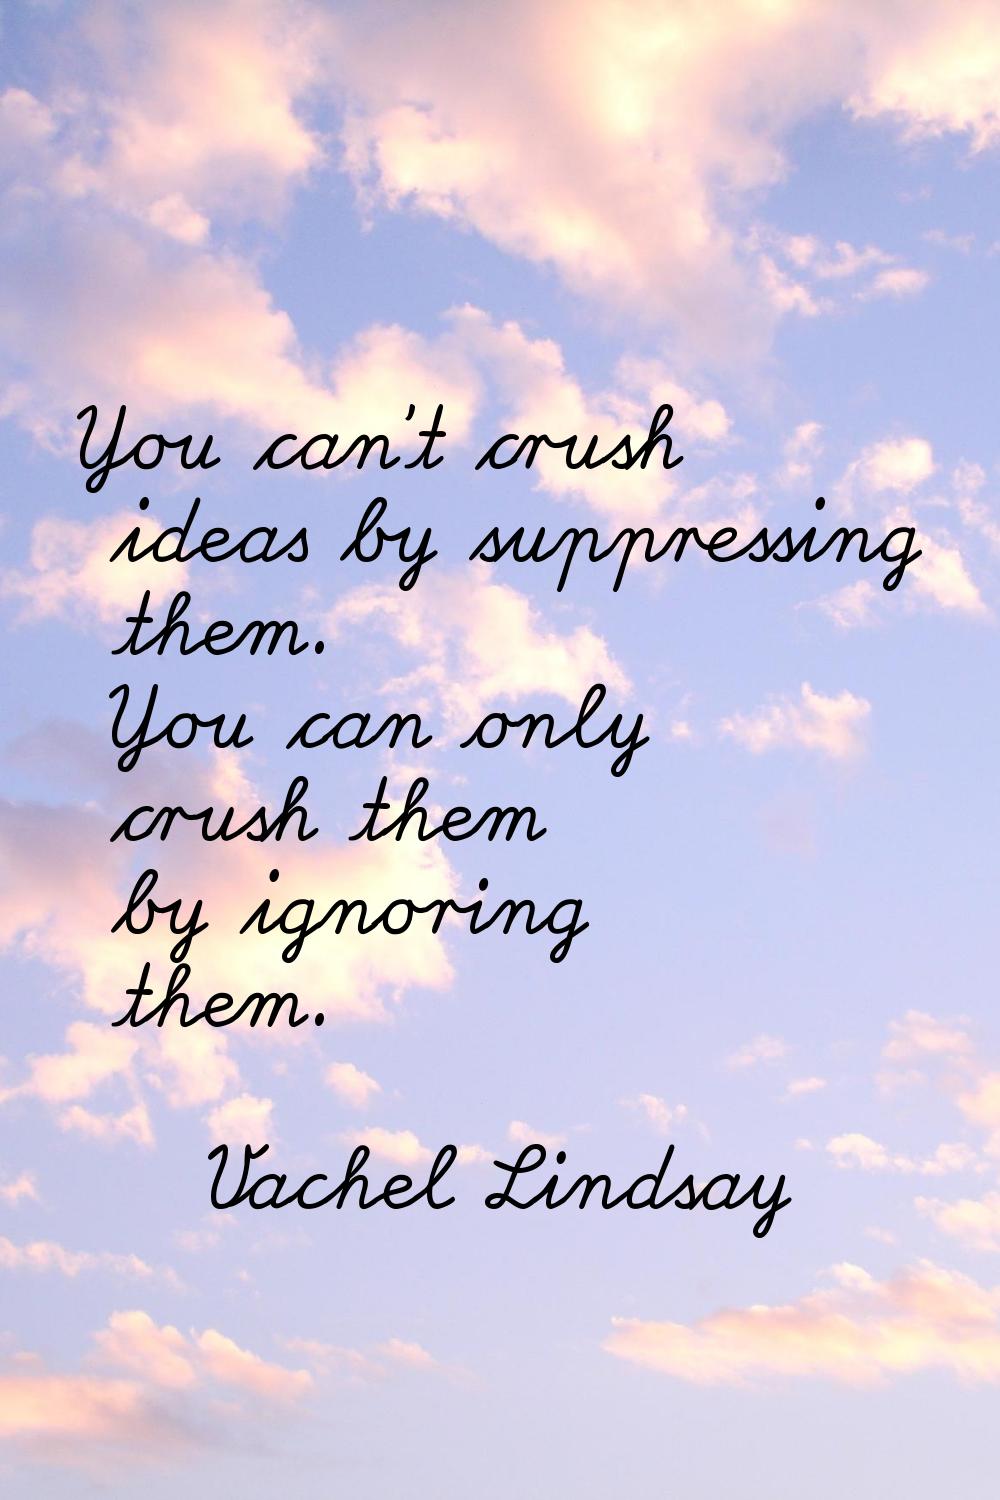 You can't crush ideas by suppressing them. You can only crush them by ignoring them.